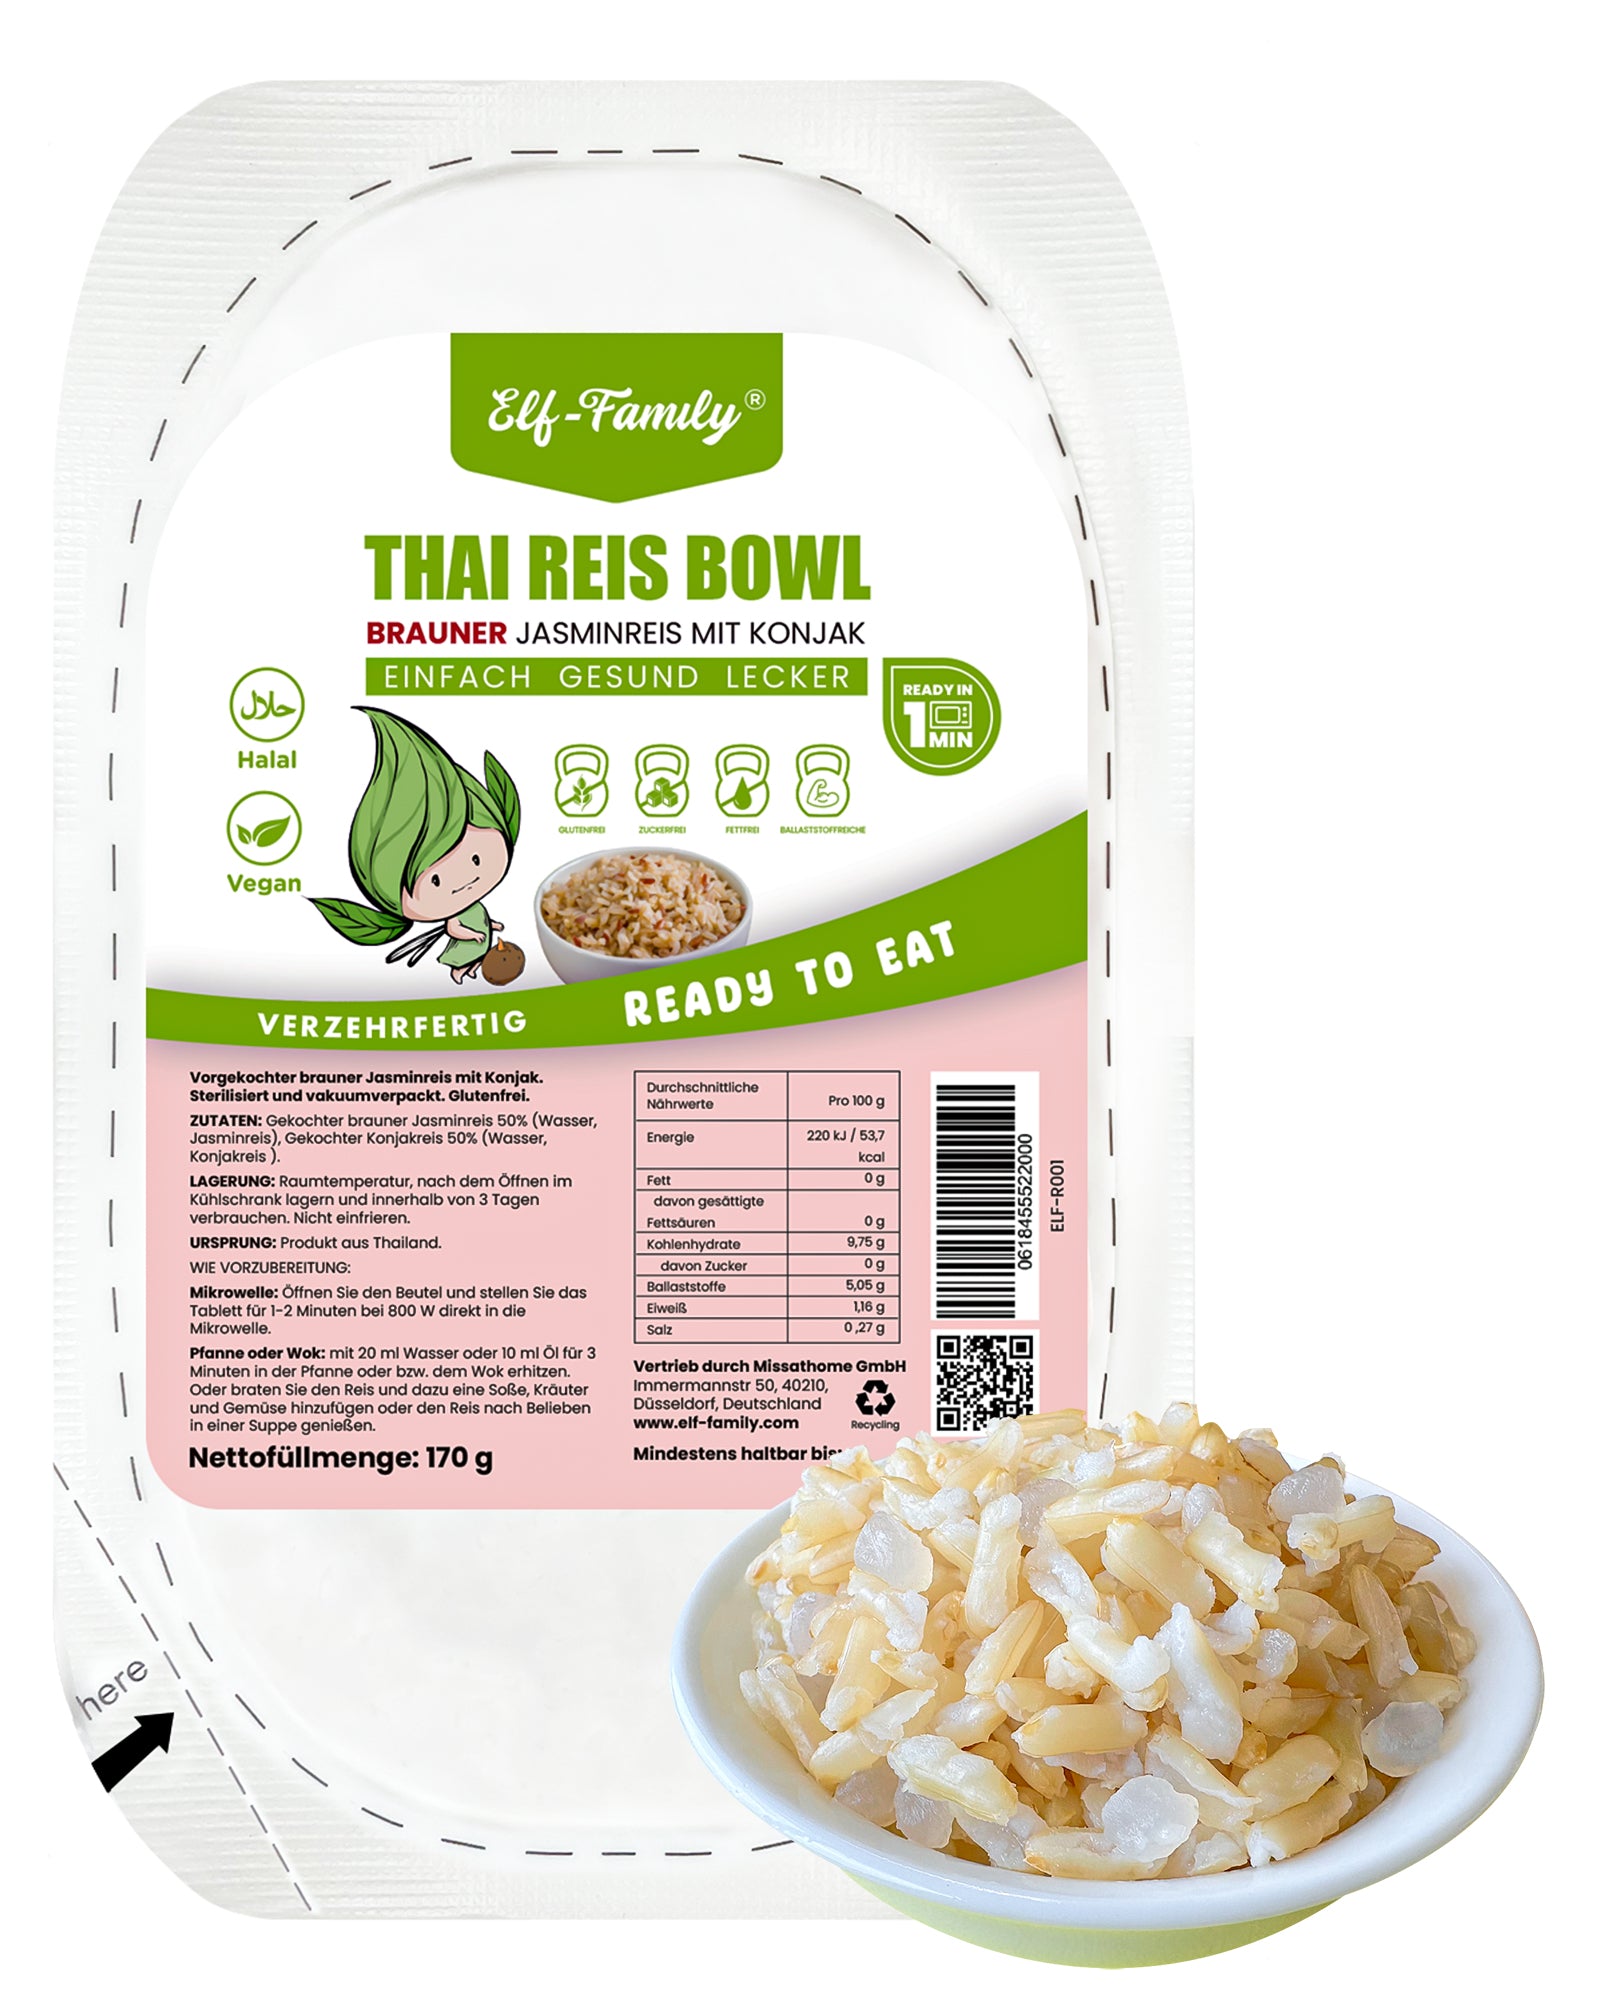 Elf-Family Instant Brown Jasmine Rice Konjac Rice Bowl from Thailand - Ready meals for microwave in 1 minute - Natural superfoods micronutrients - Vegan Shirataki - Low calorie/fat free - Box of 1 